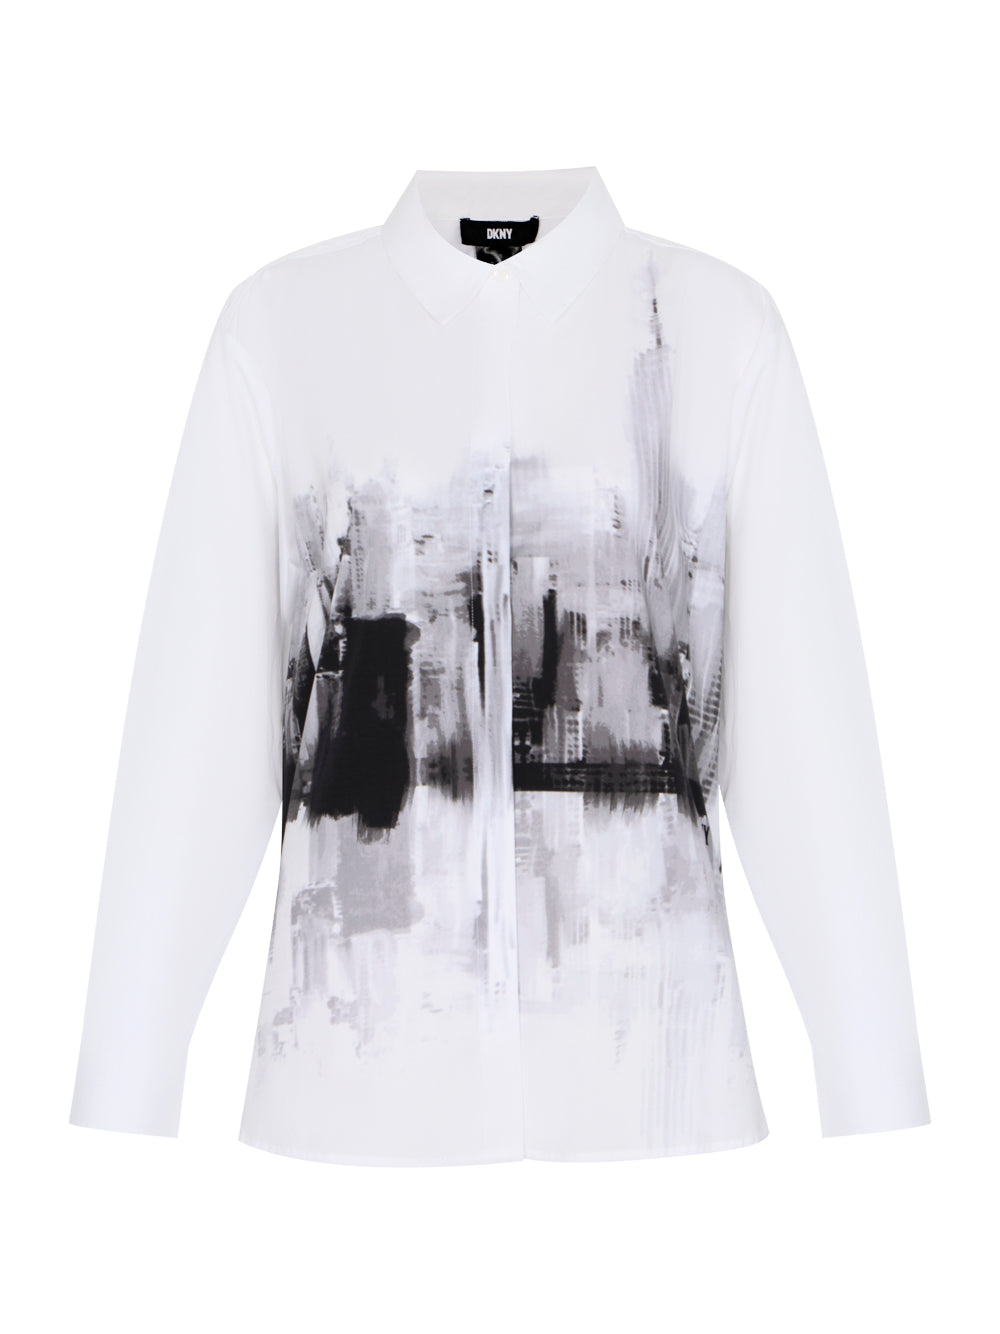 Long Sleeve Button Down Cityscape Graphic (White/Black/Grey)